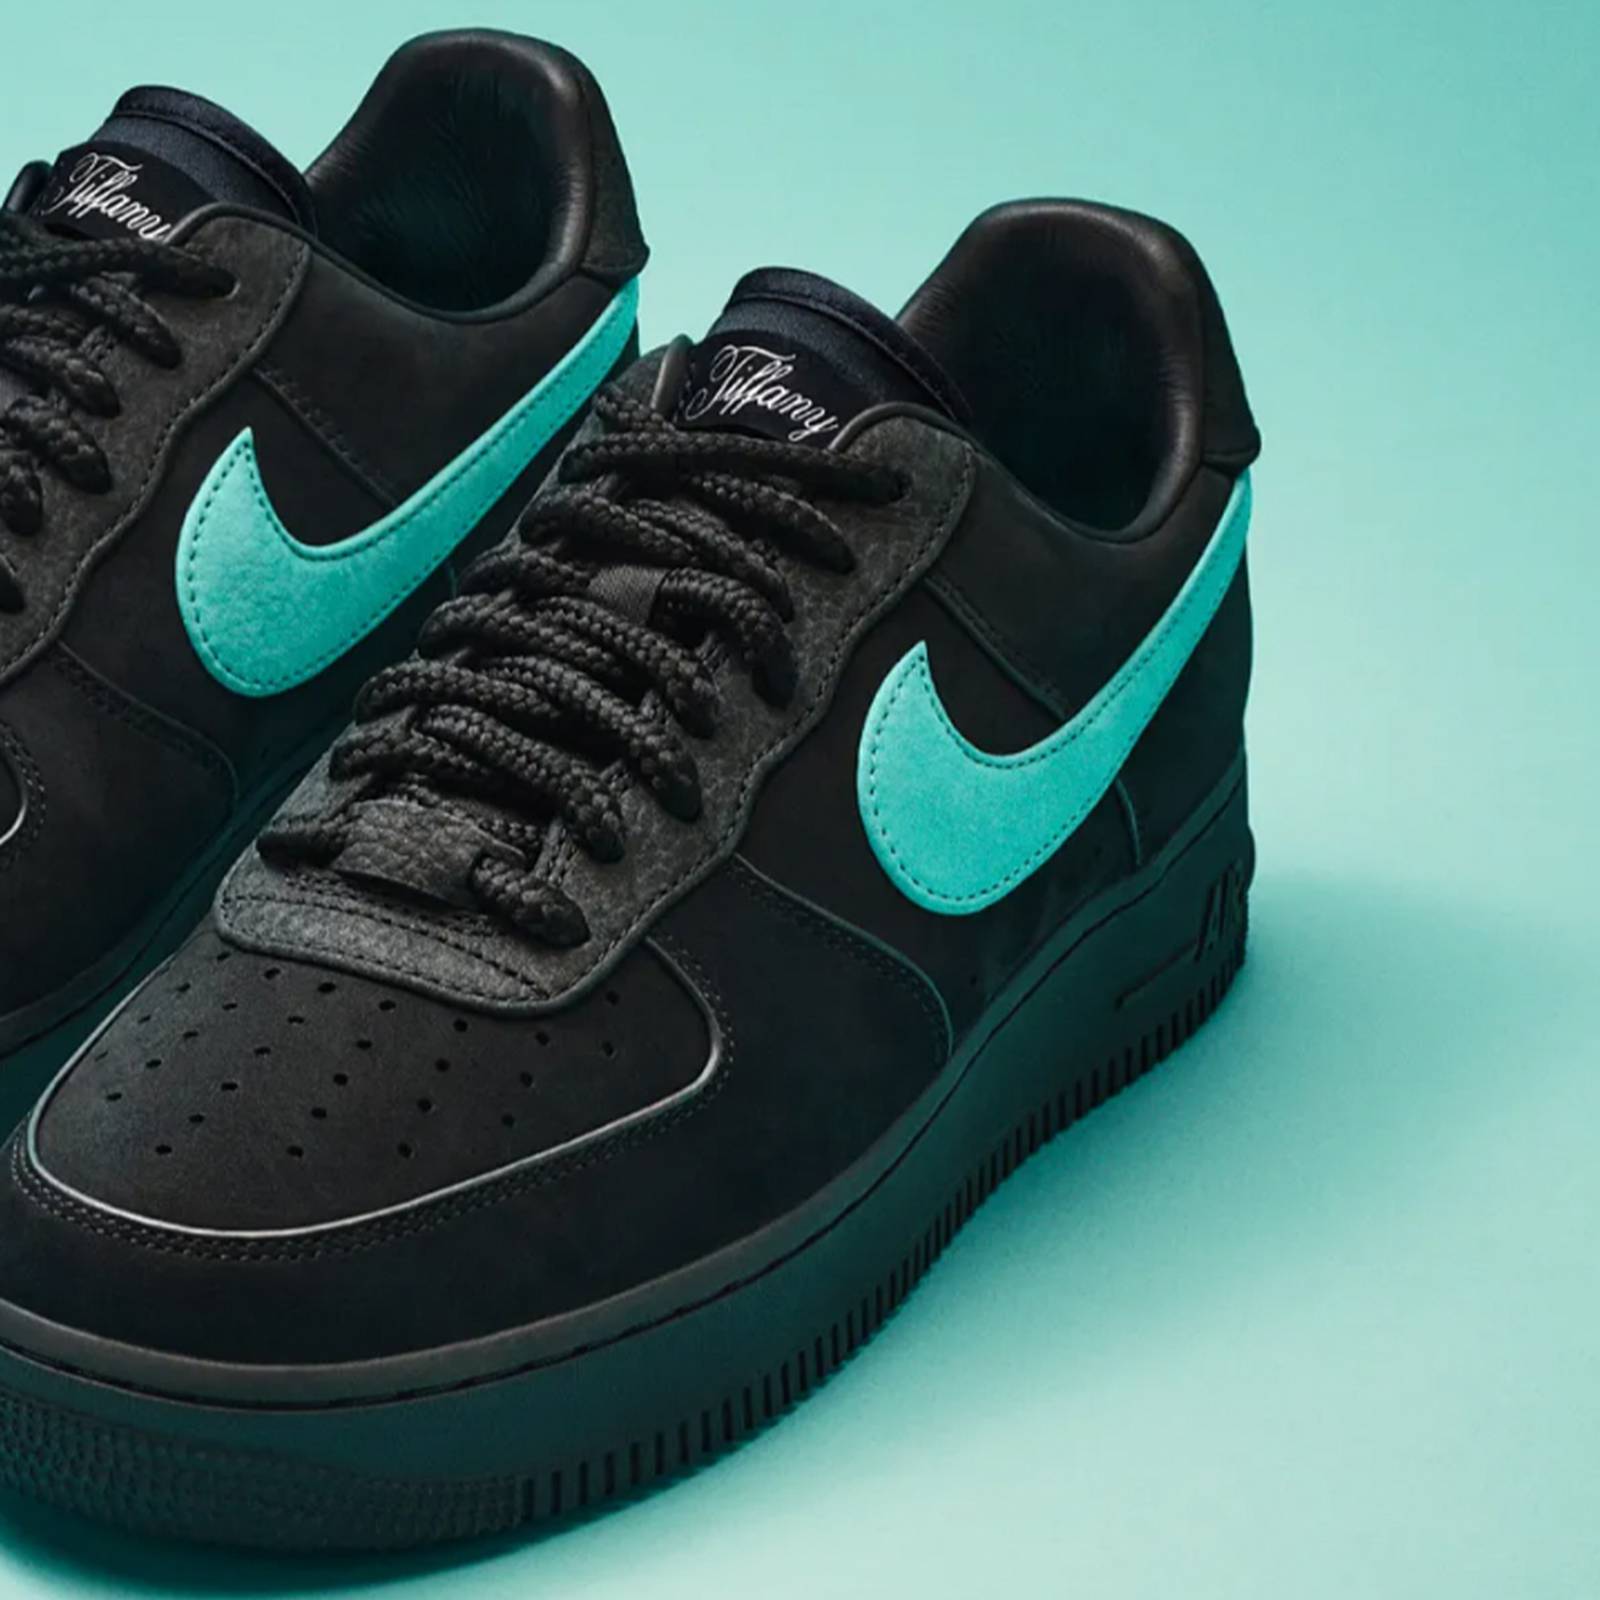 These AI sneaker versions of the Tiffany x Nike collab are pretty good